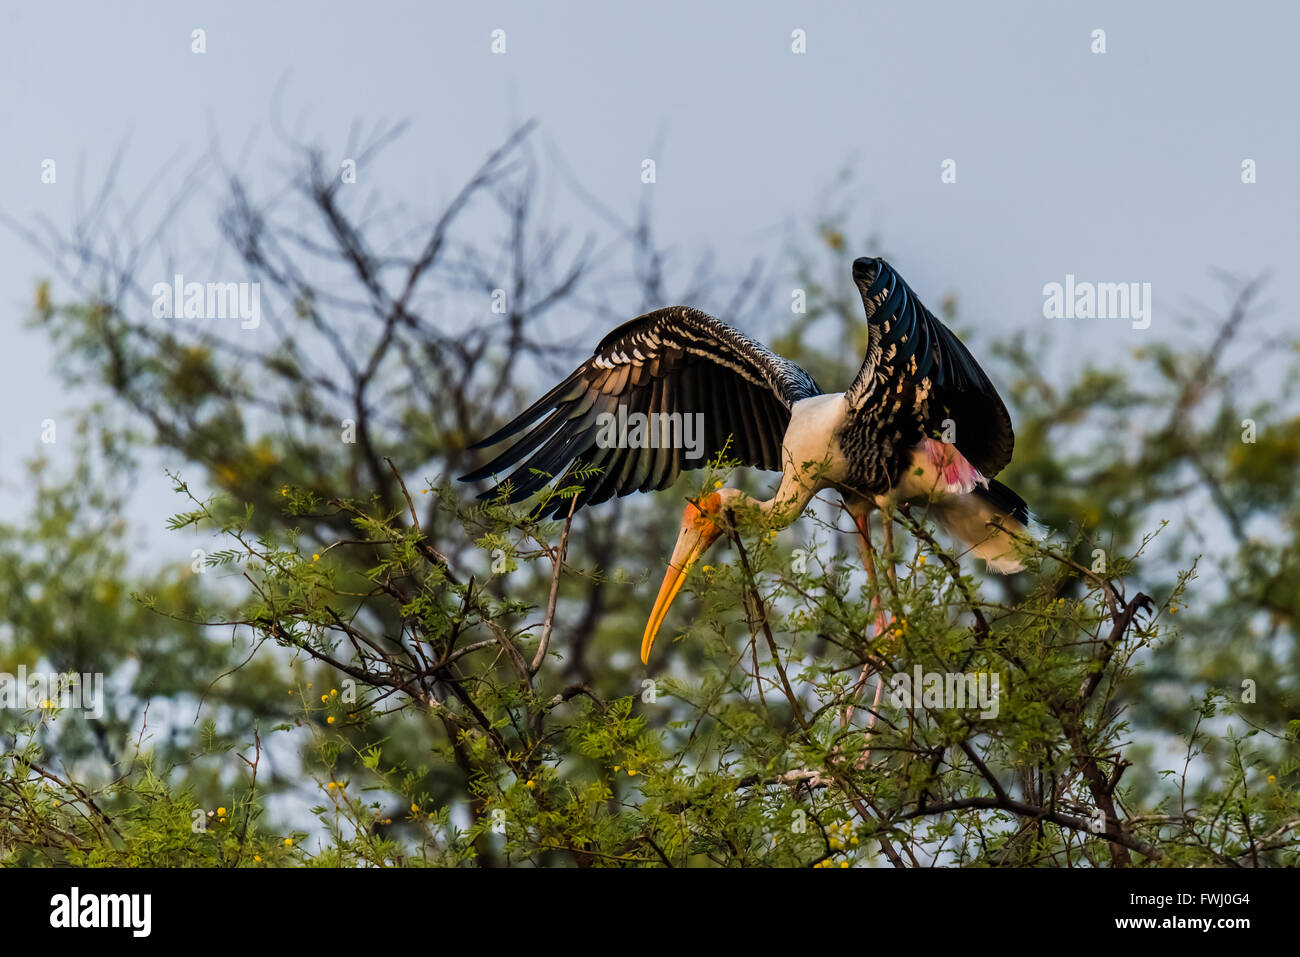 The painted stork is a large wading bird in the stork family. It is found in the wetlands of the plains of tropical Asia south o Stock Photo